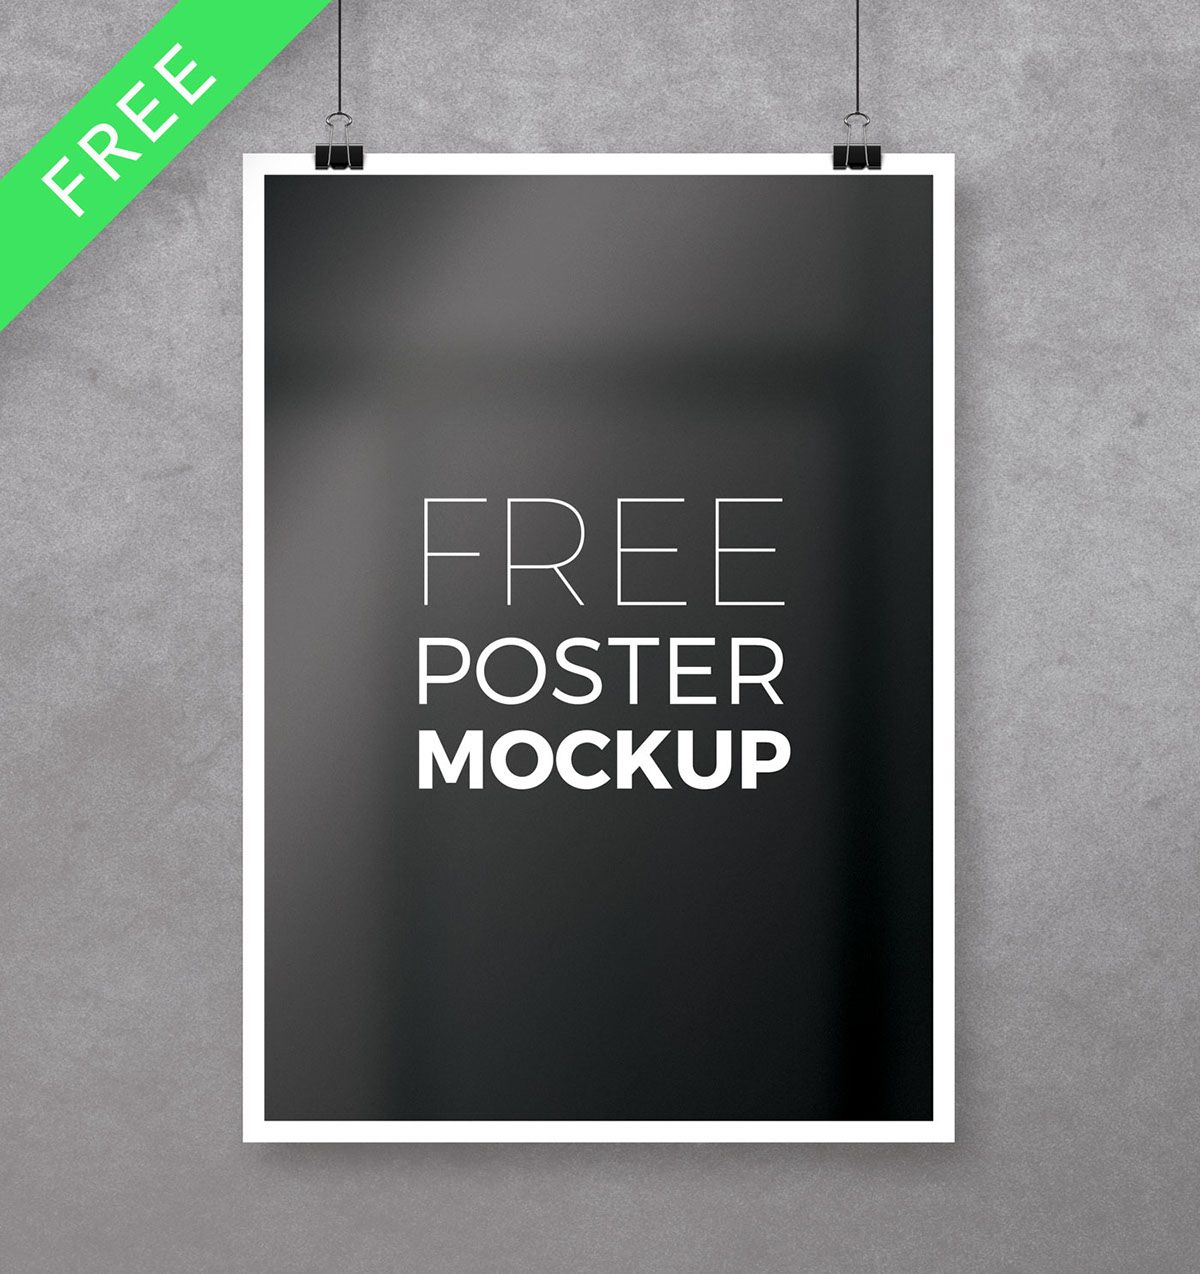 Free Poster Mockup Psd On Behance Poster Mockup Free Poster Mockup Free Psd Poster